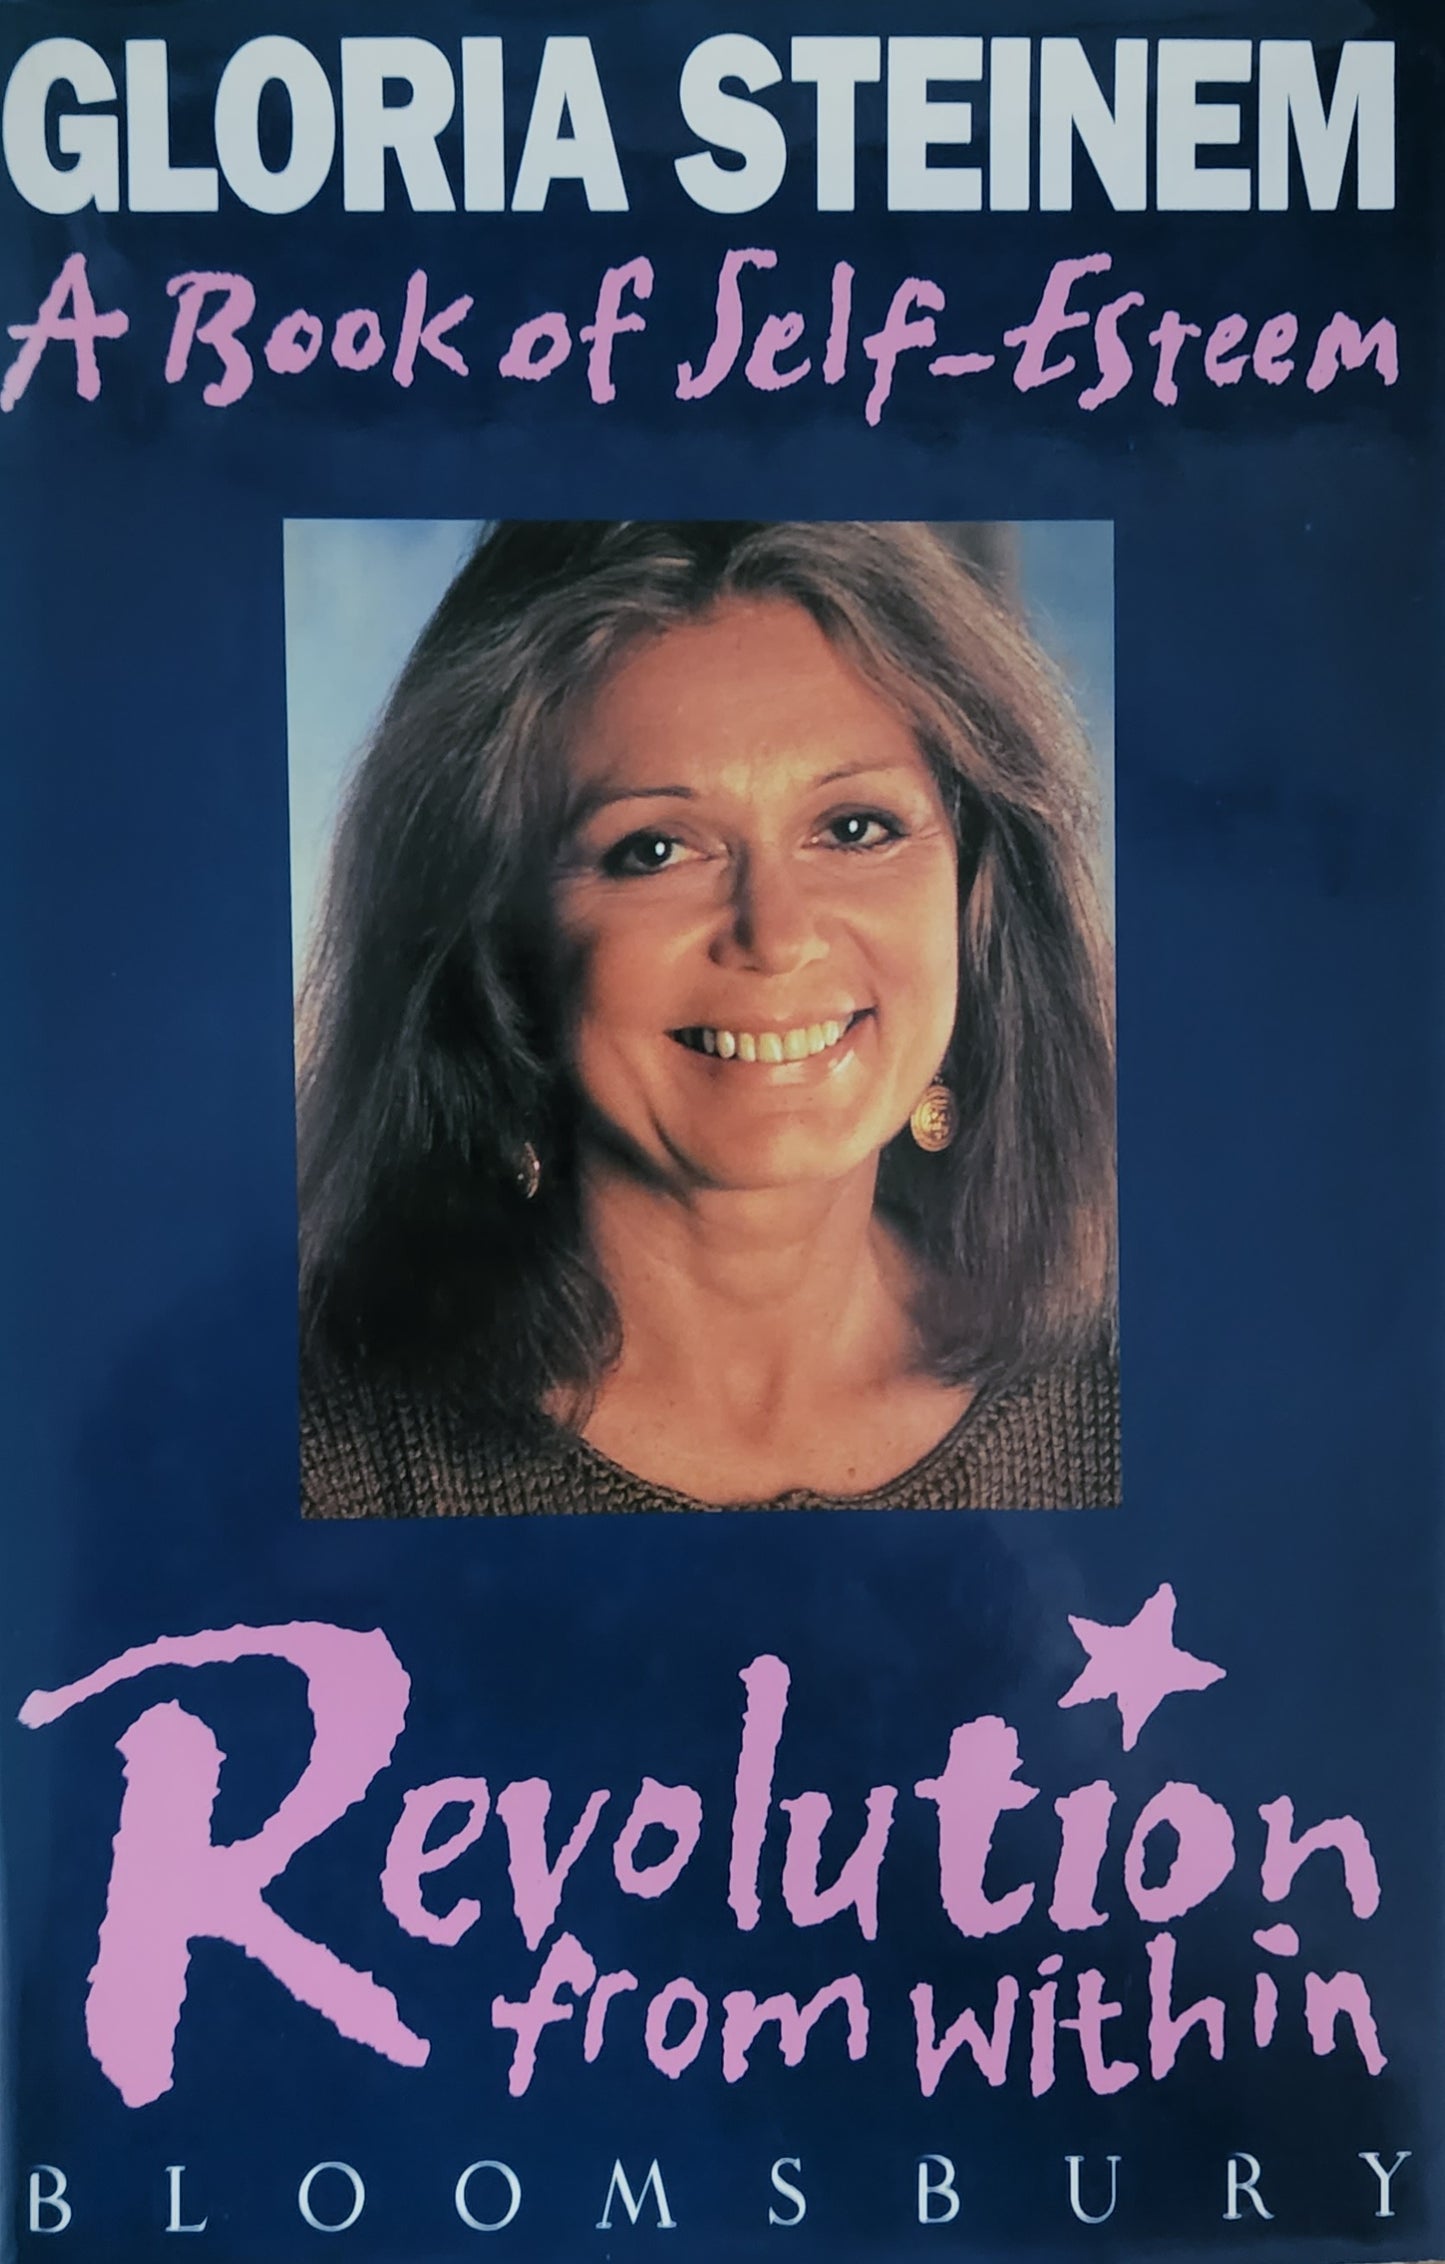 Revolution from within: Book of Self-esteem (1992)